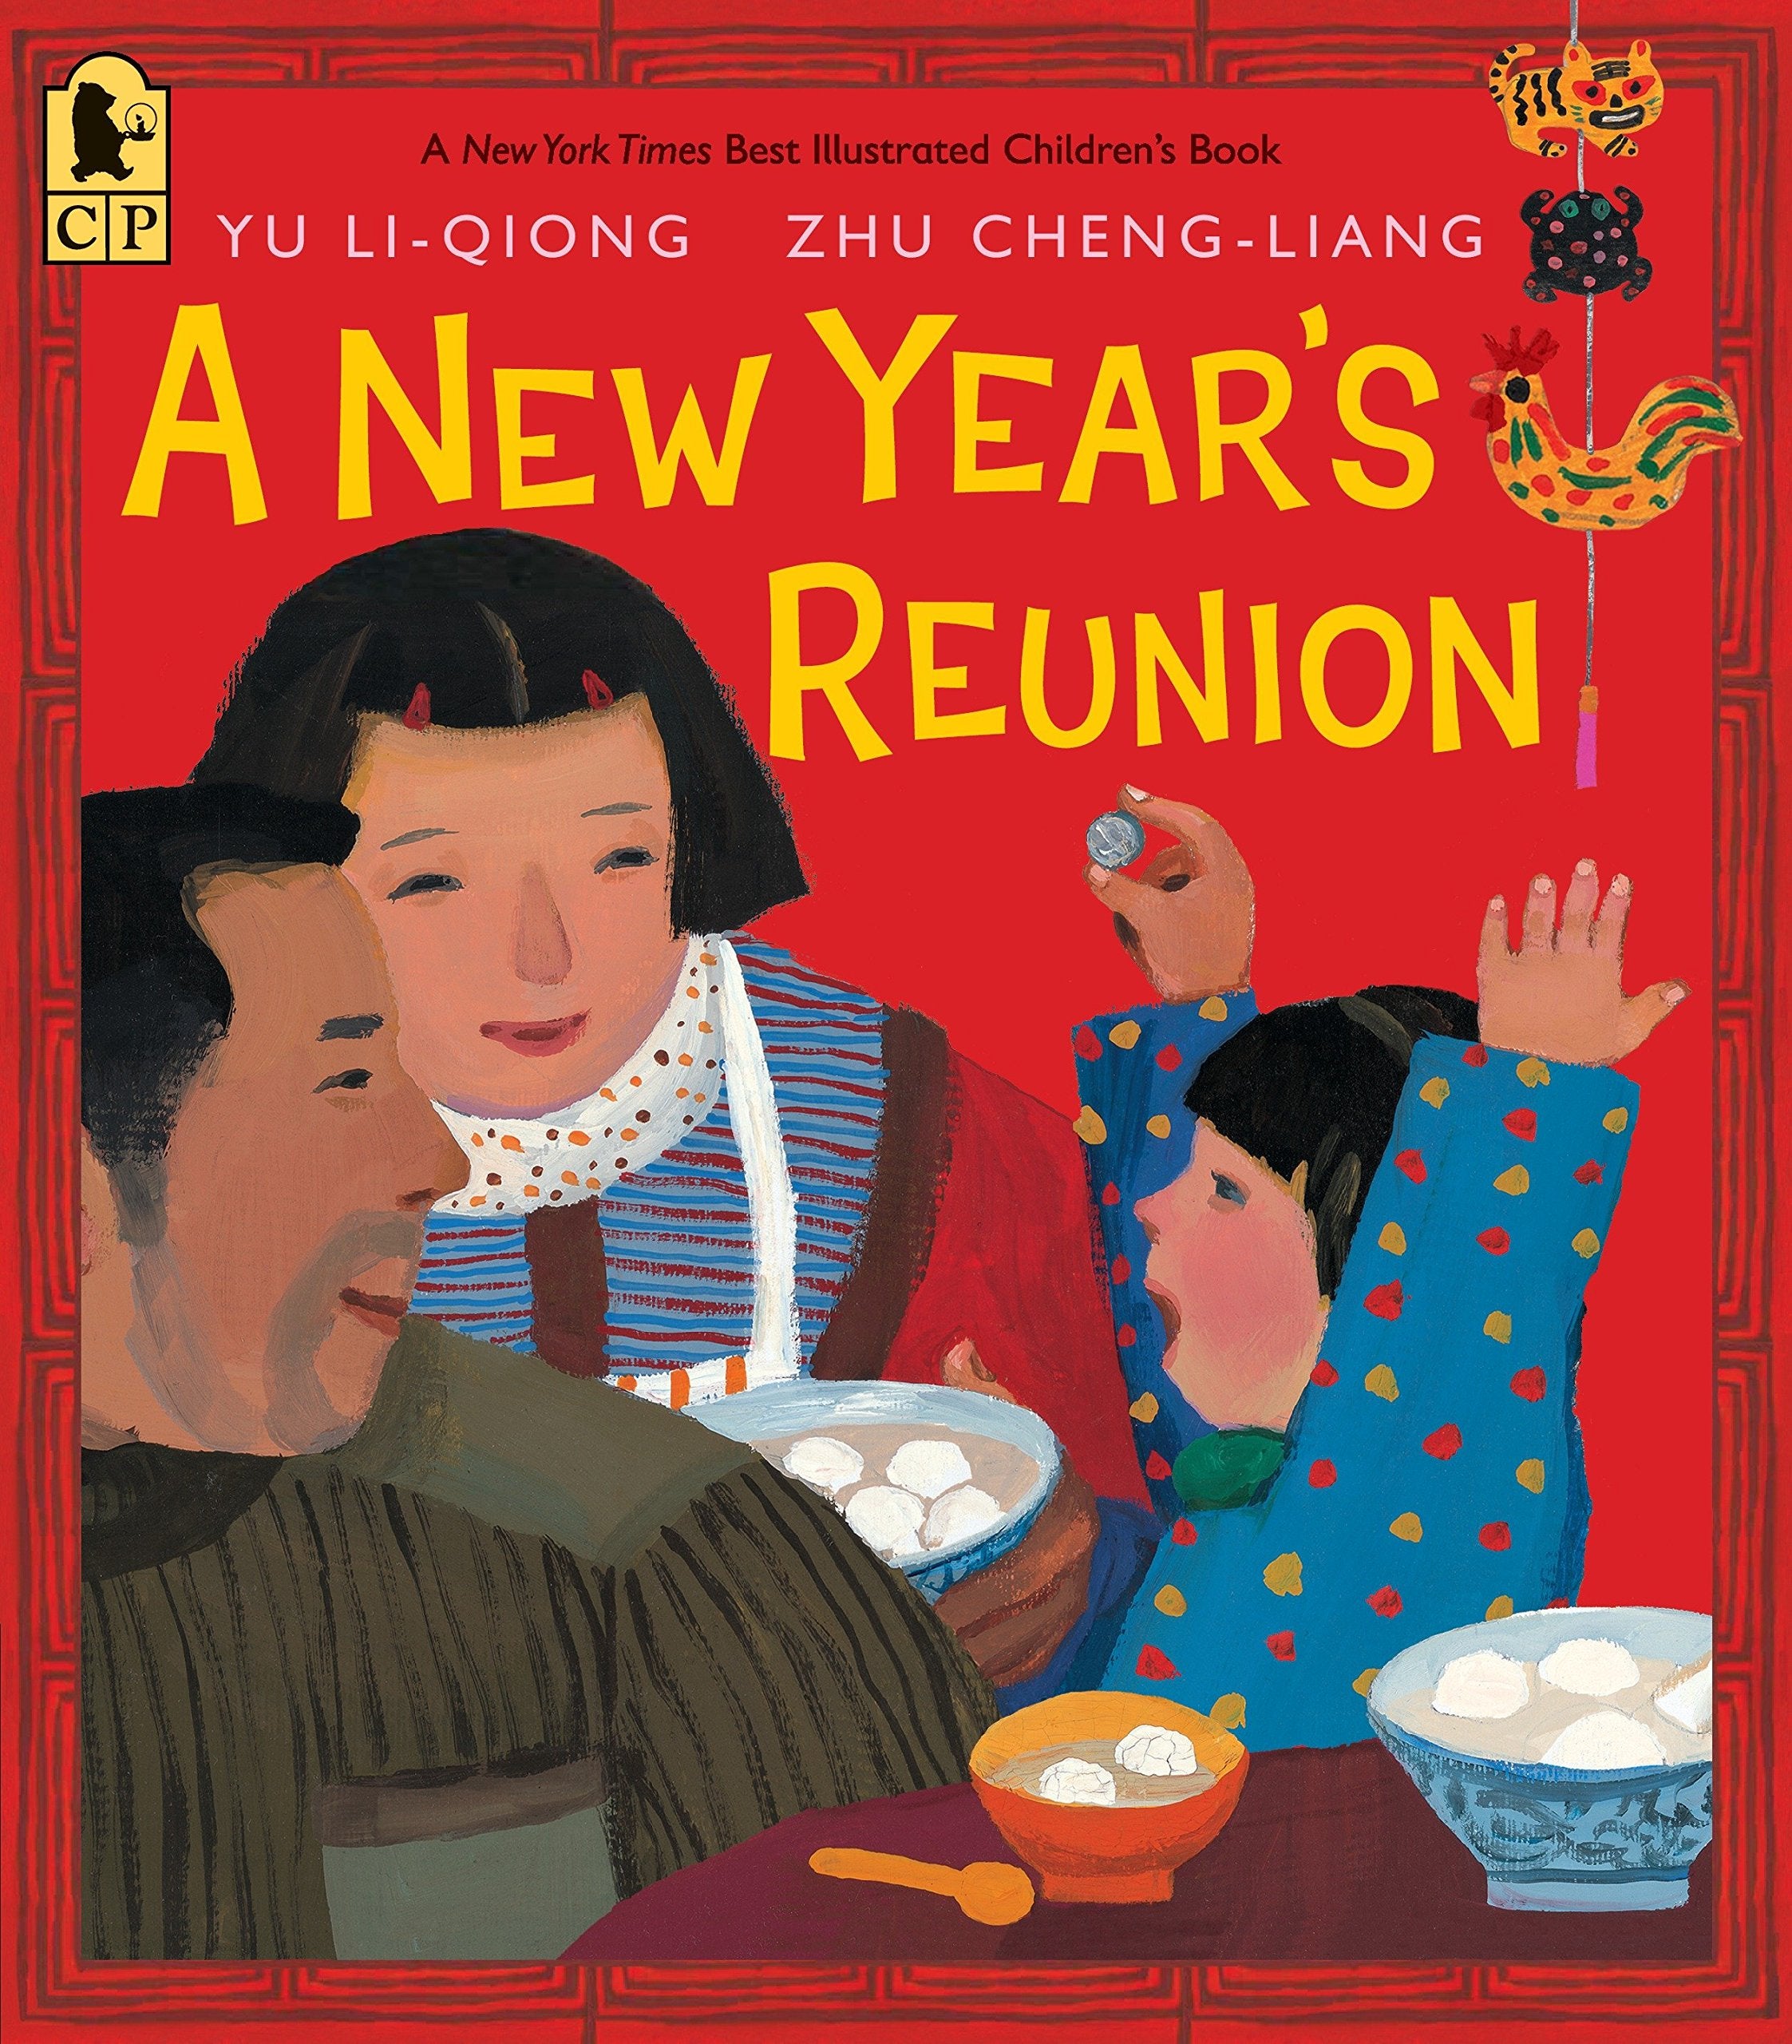 Book cover for "A New Year's Reunion." Two adults and a child sit at a table, bowls of food in front of them. The child holds up a silver coin in excitement.